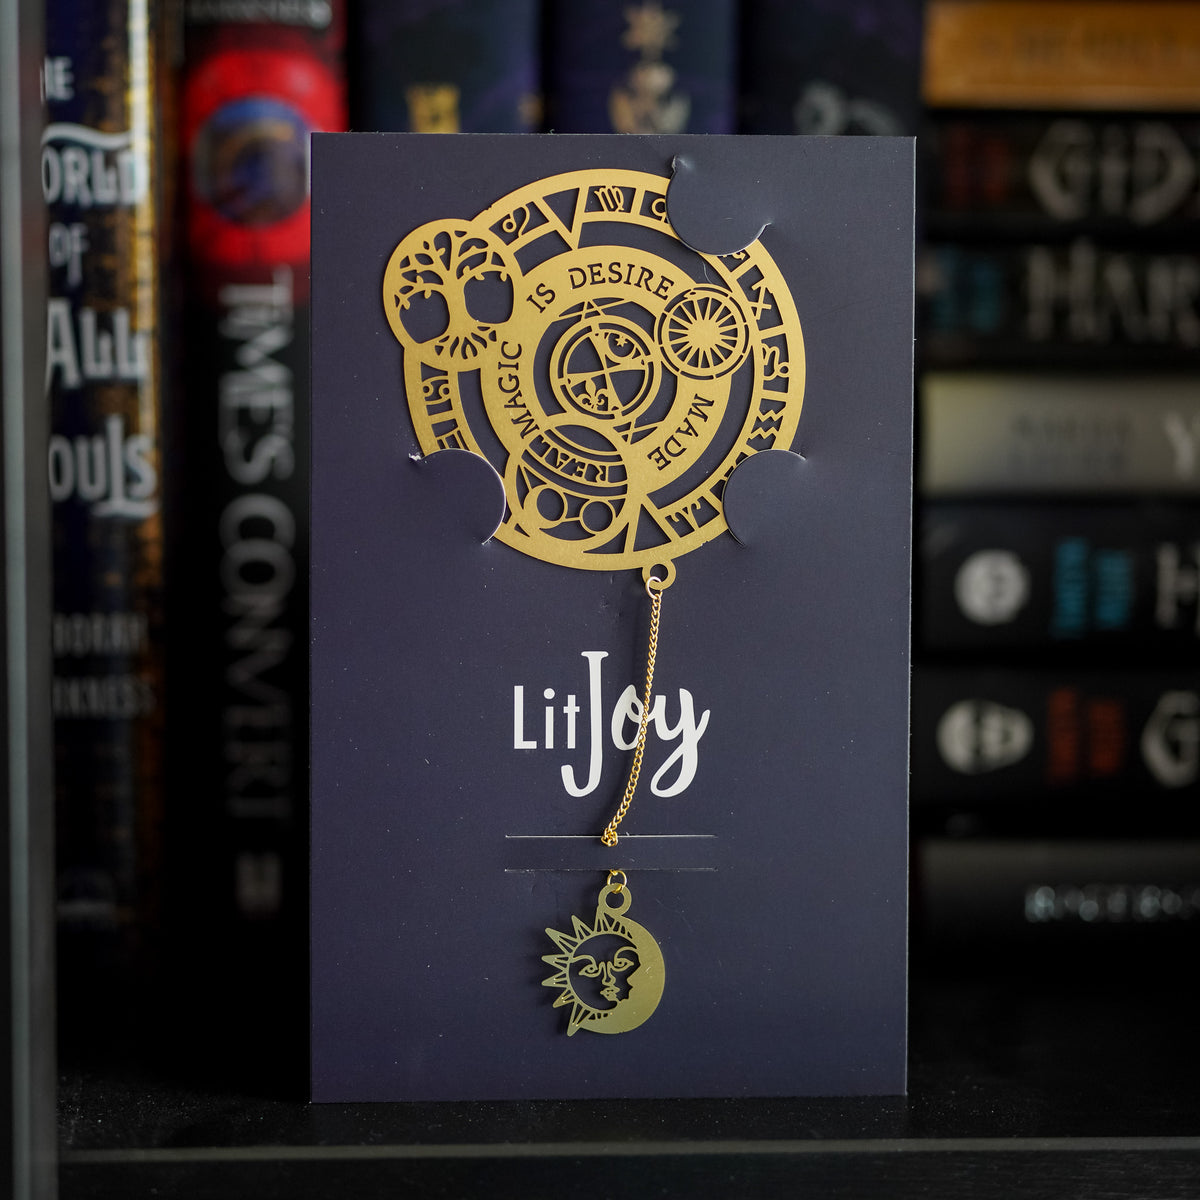 Witch Discovery Metal Bookmark is a gold bookmark with a circular top that says &quot;Magic is desire made real&quot; and a hanging moon and sun